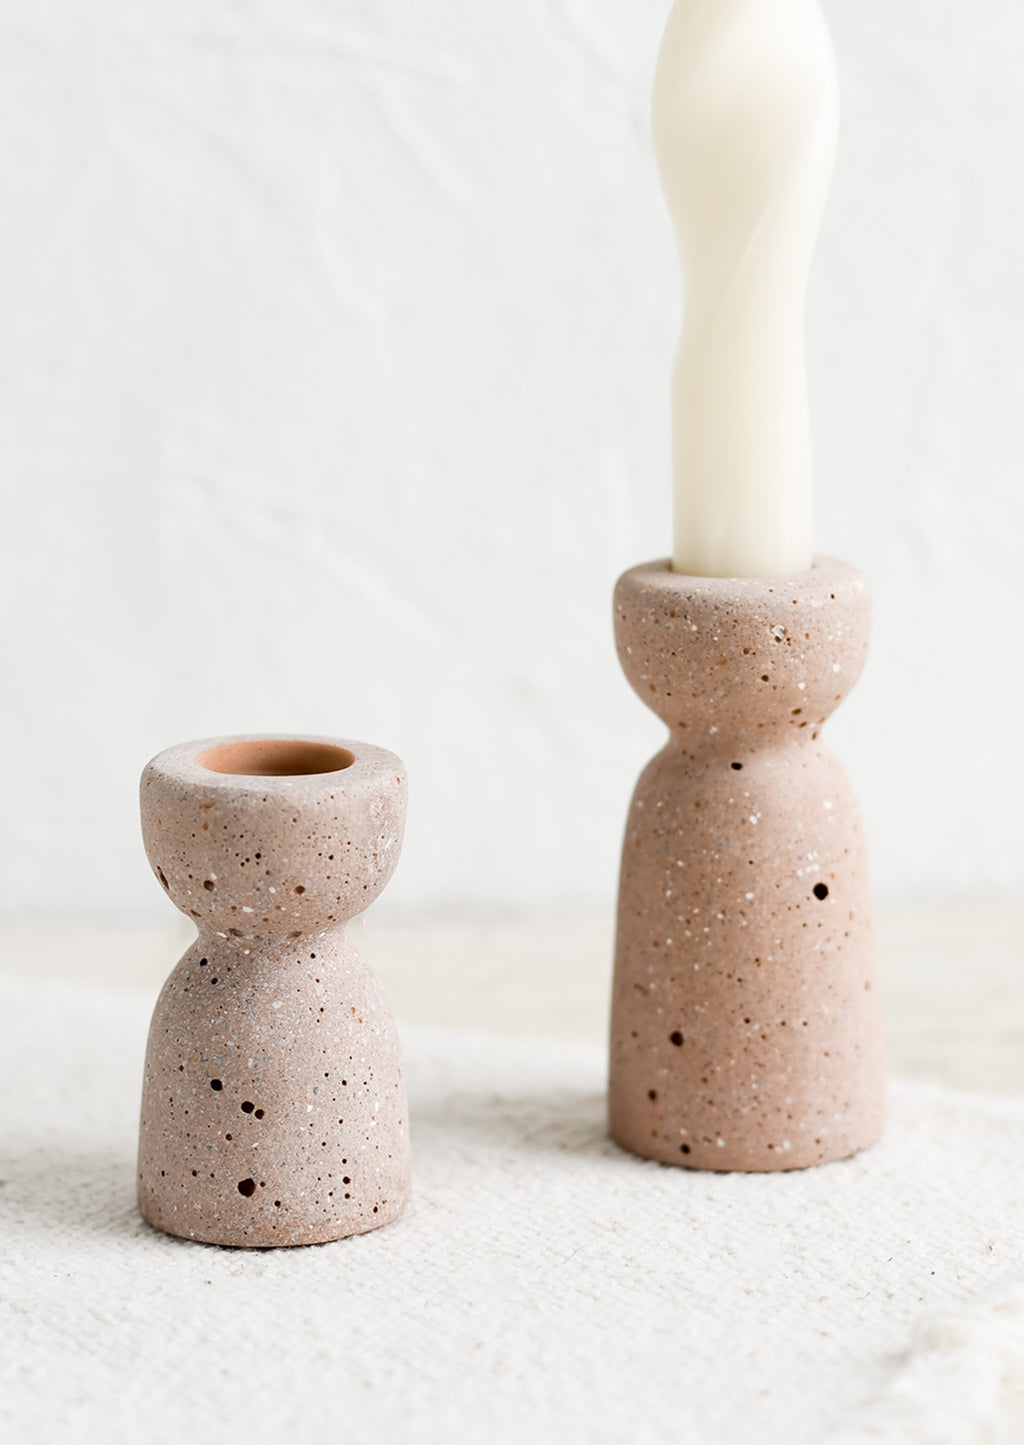 Short / River Rock: Two short and tall brown-pink concrete candleholders with pumice-like texture.